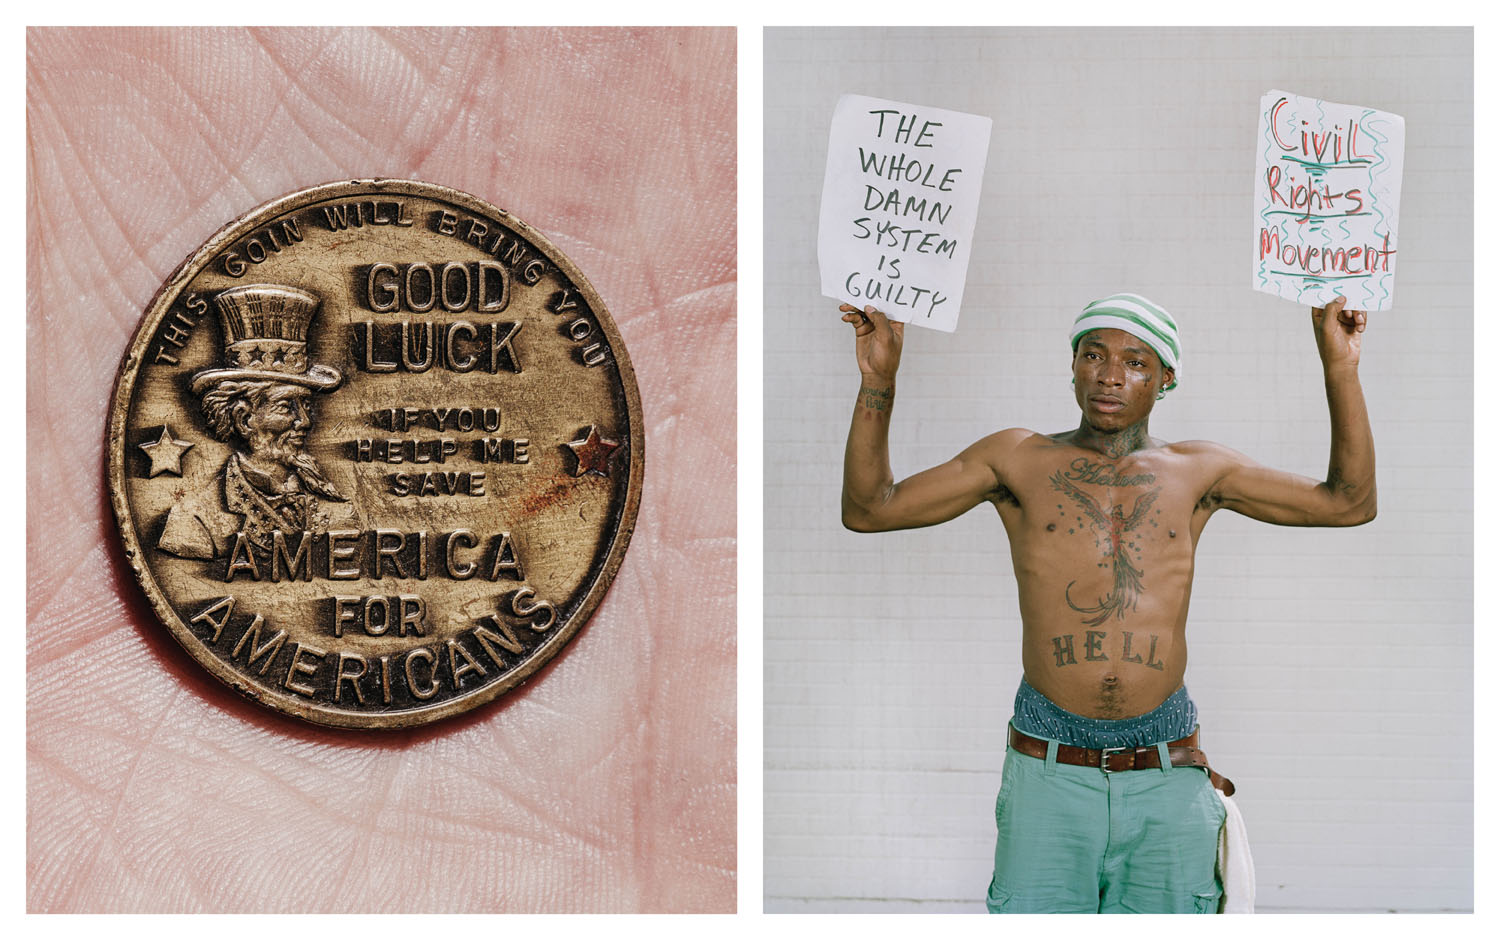 LEFT: A brass coin created and distributed in 1940 by Hugh T. Fisher, a former member of the Kansas senate, to stimulate “democratic thinking” in Kansans. RIGHT: Ferguson youth activist Dontey Carter. “This isn’t just a stand for Michael Brown. This is a stand for everybody that needs justice. The officers need to protect and serve, not reject and keep us scared. We need this and that is why as young people this is our civil rights movement. We will take it all the way to the Supreme Court if we have to.”